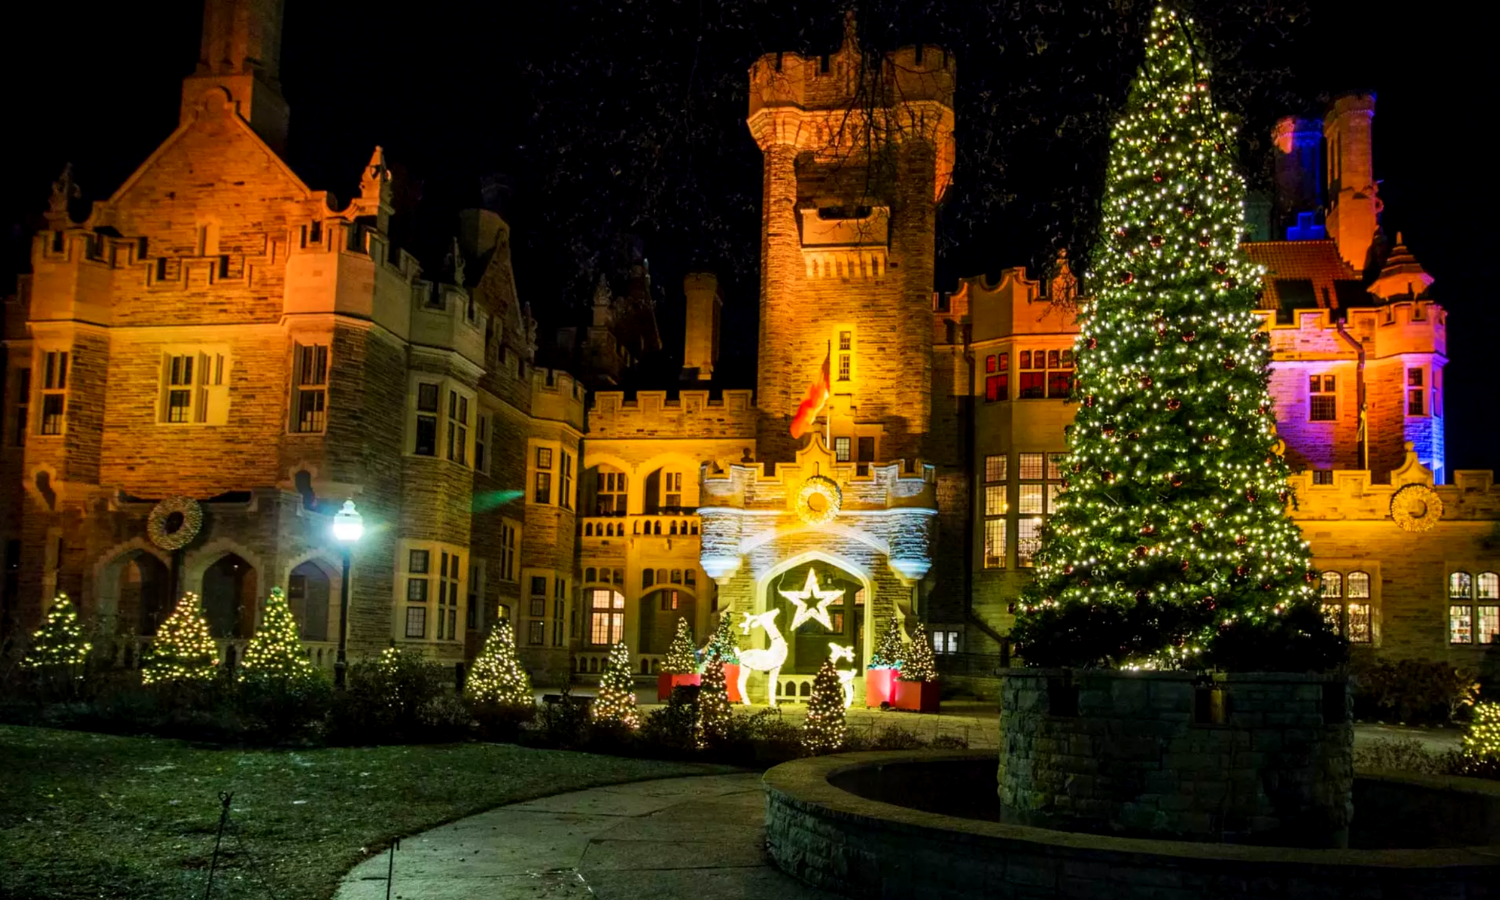 A picture of a gothic castle with a huge Christmas tree outside and adorned with fairy lights.